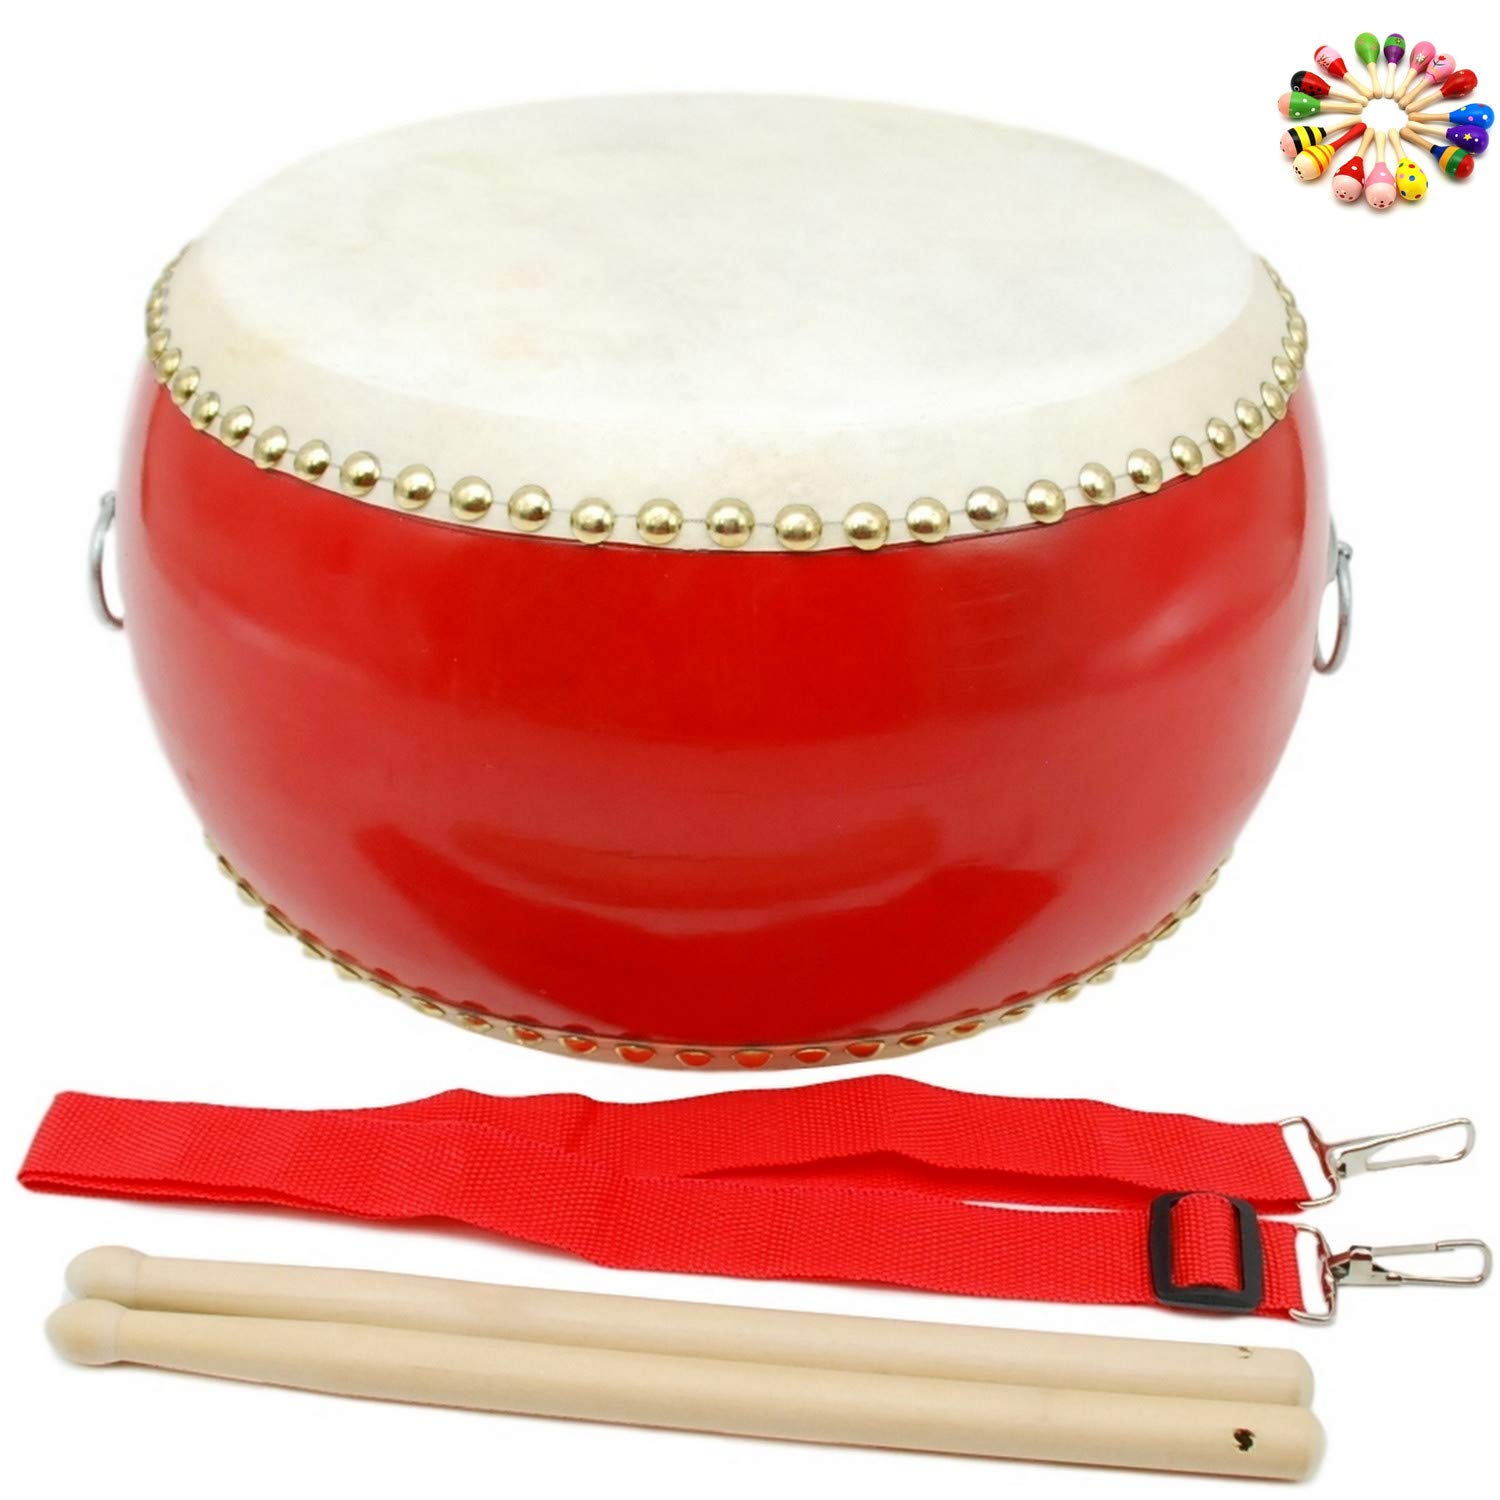 M0N0liTH futoshi hand drum Japanese drum small futoshi hand drum drum musical instruments practice real ...(27cm)